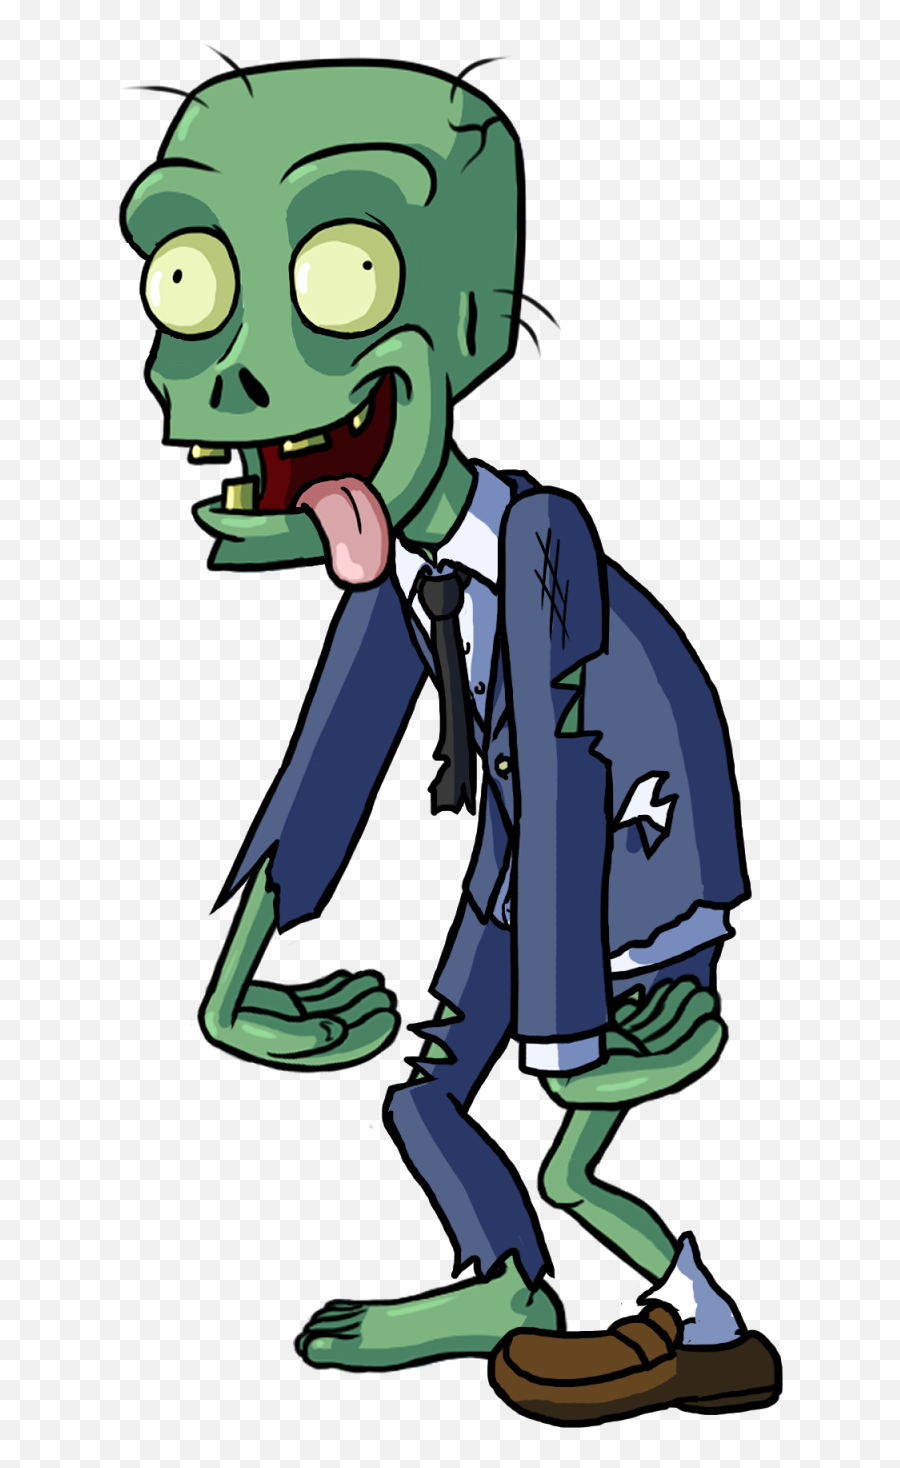 Zombie Png Pic - Transparent Background Zombie Png Cartoon Emoji,Zombie Emoticons For Android